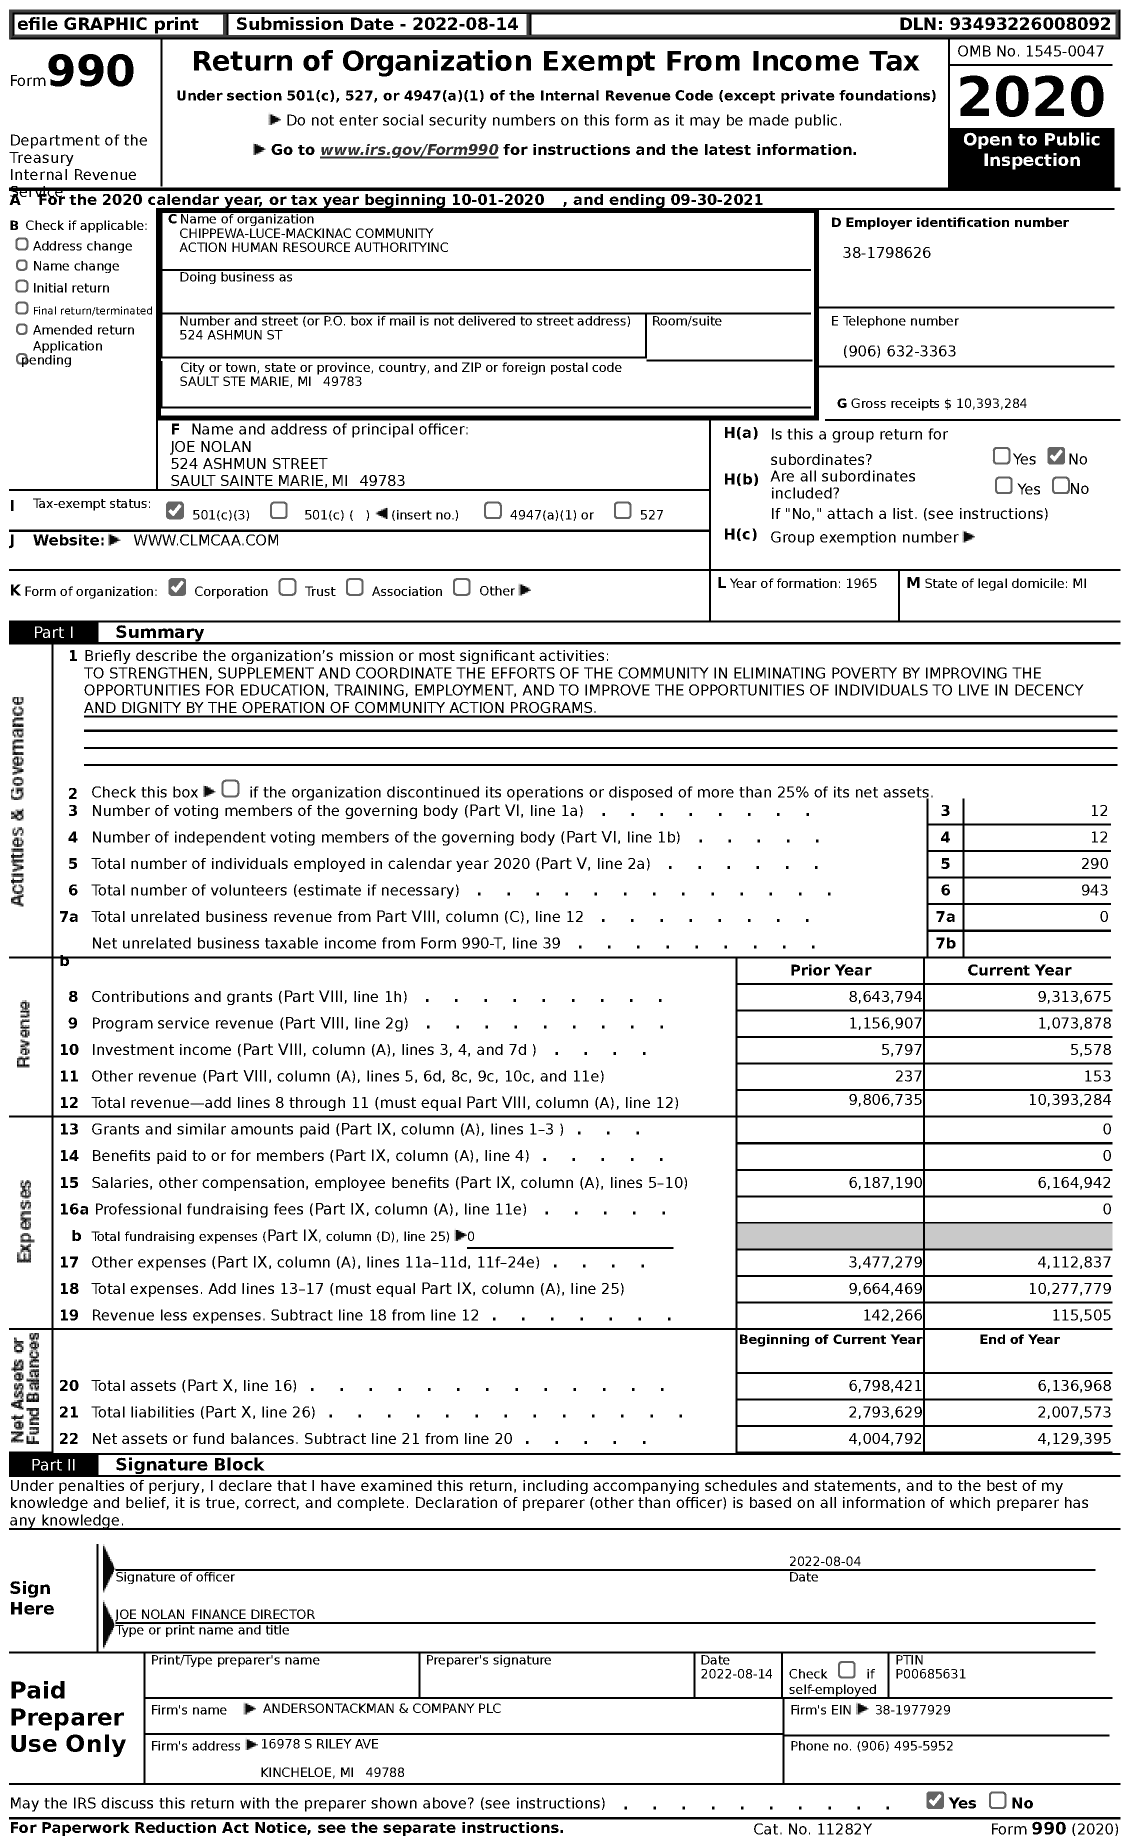 Image of first page of 2020 Form 990 for Chippewa-Luce-Mackinac Community Action Human Resource Authority